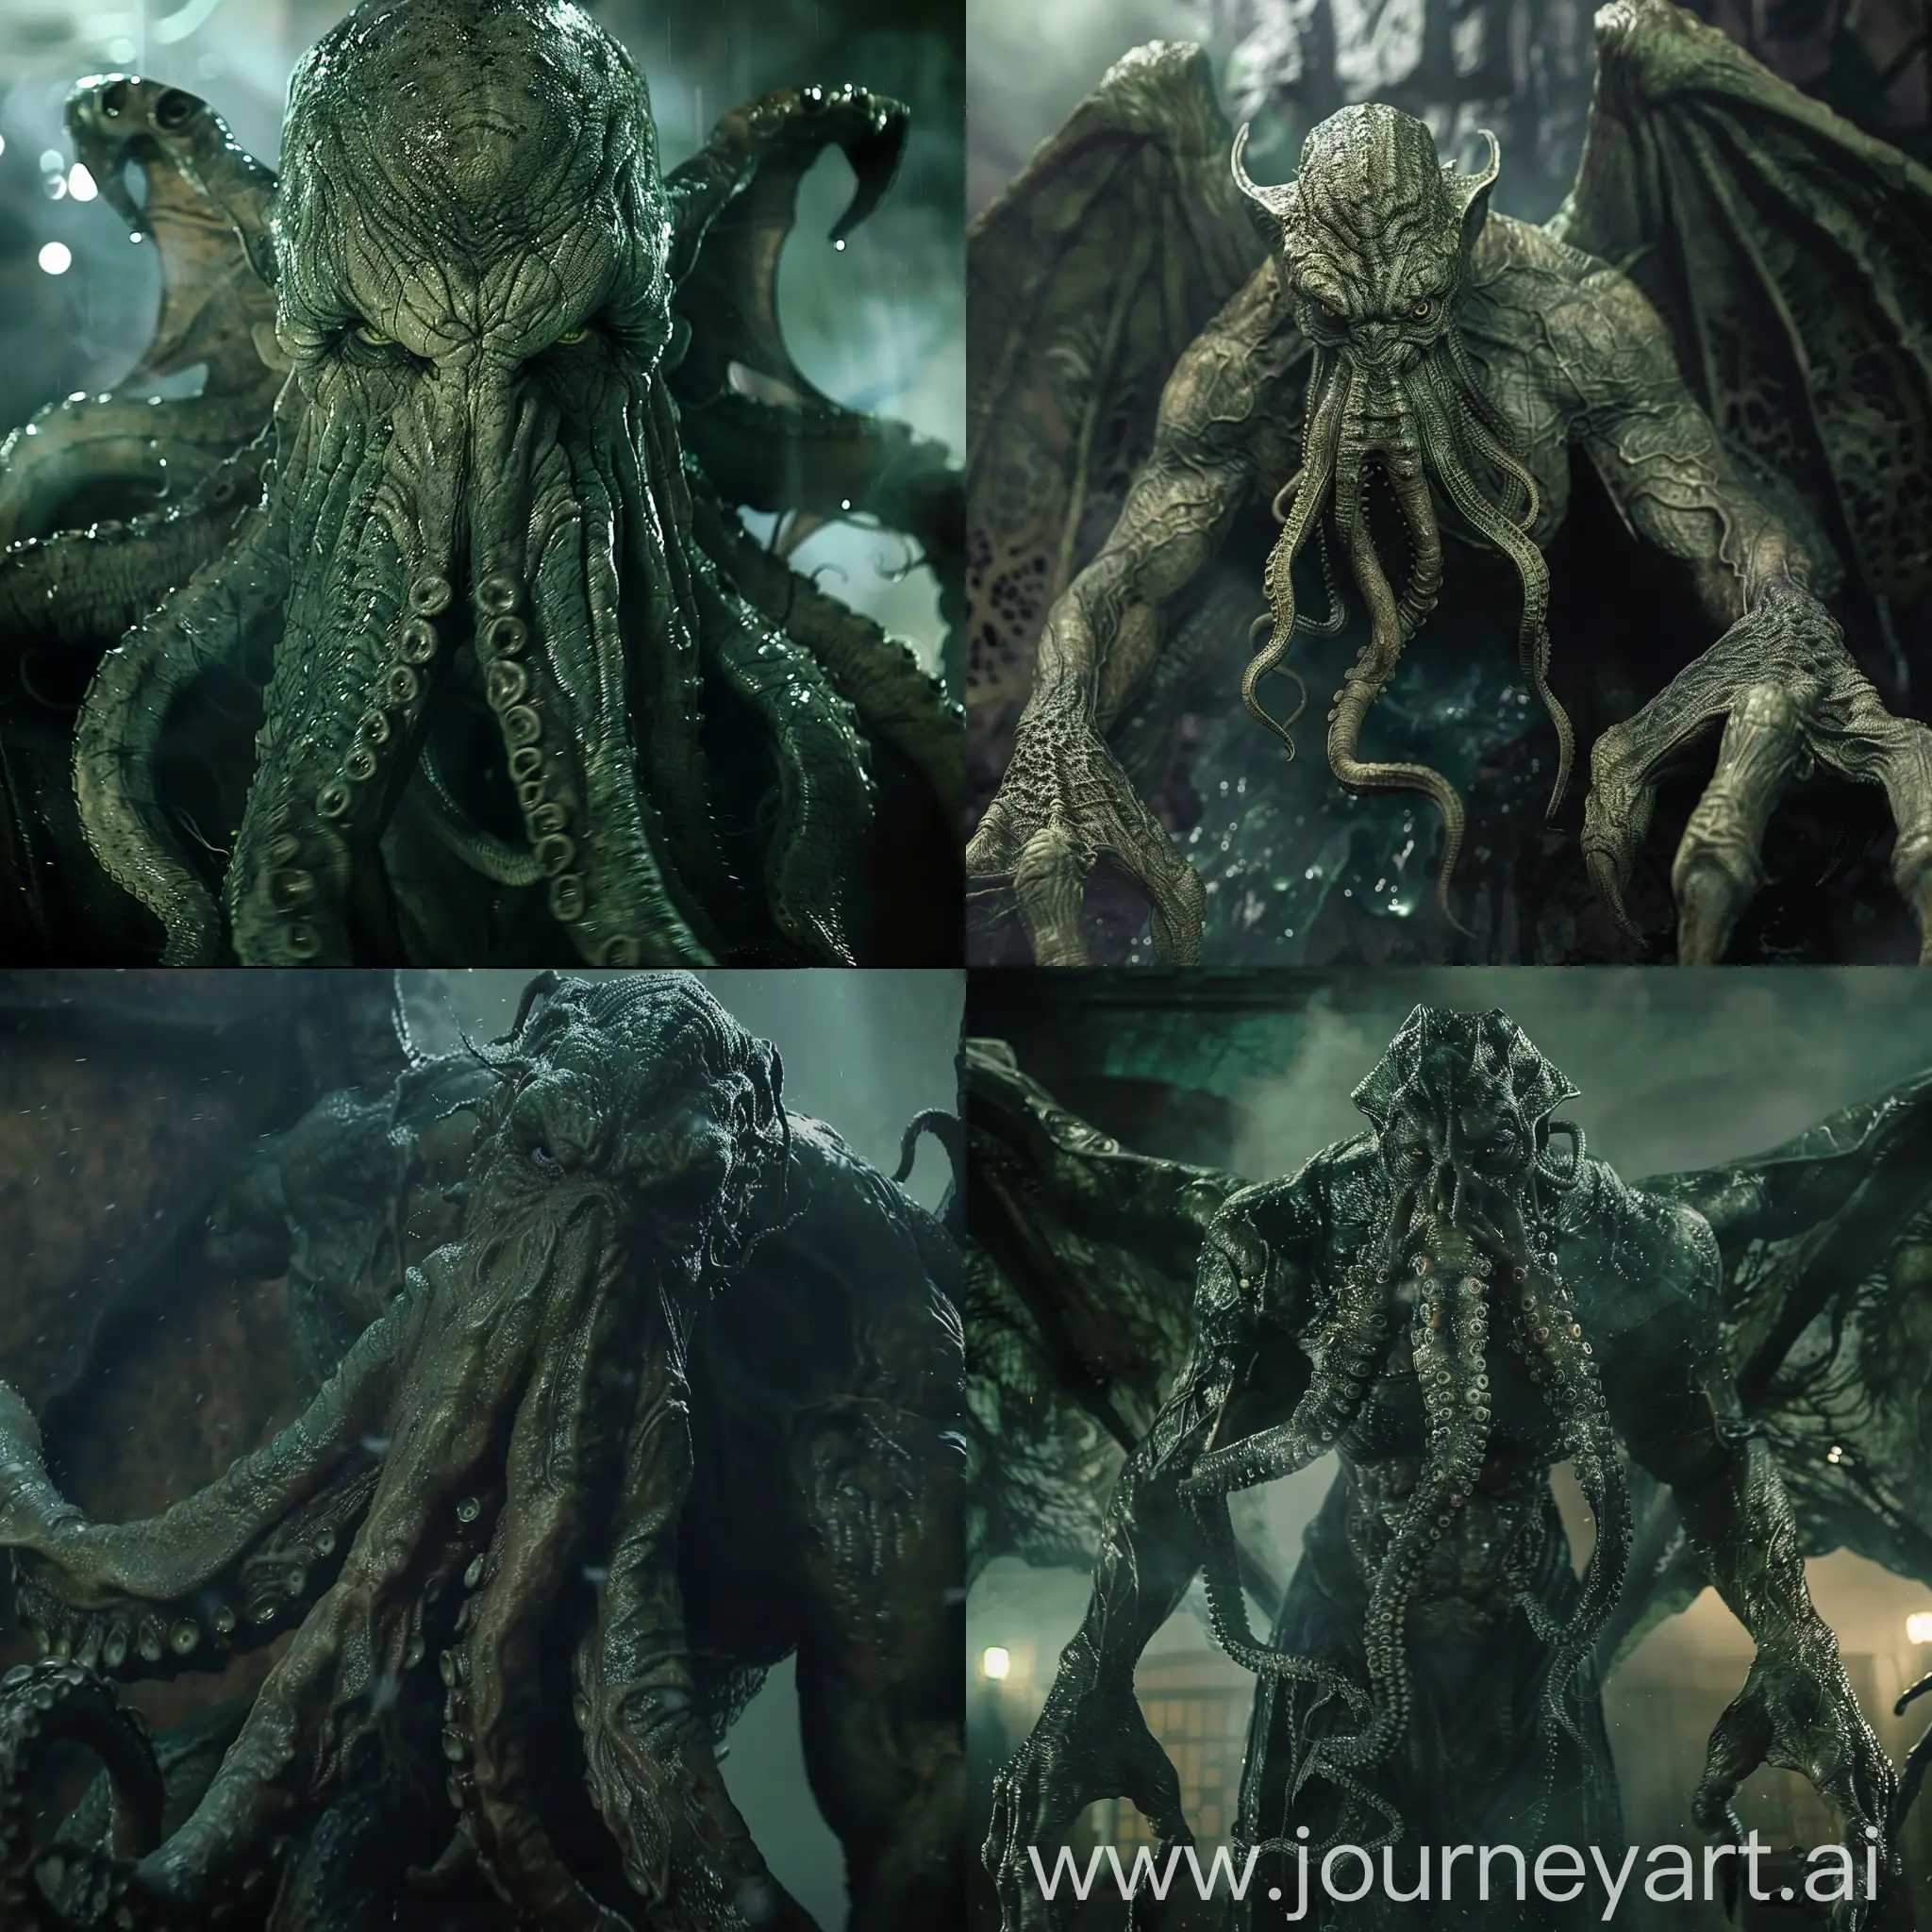 Cthulhu in live action movie